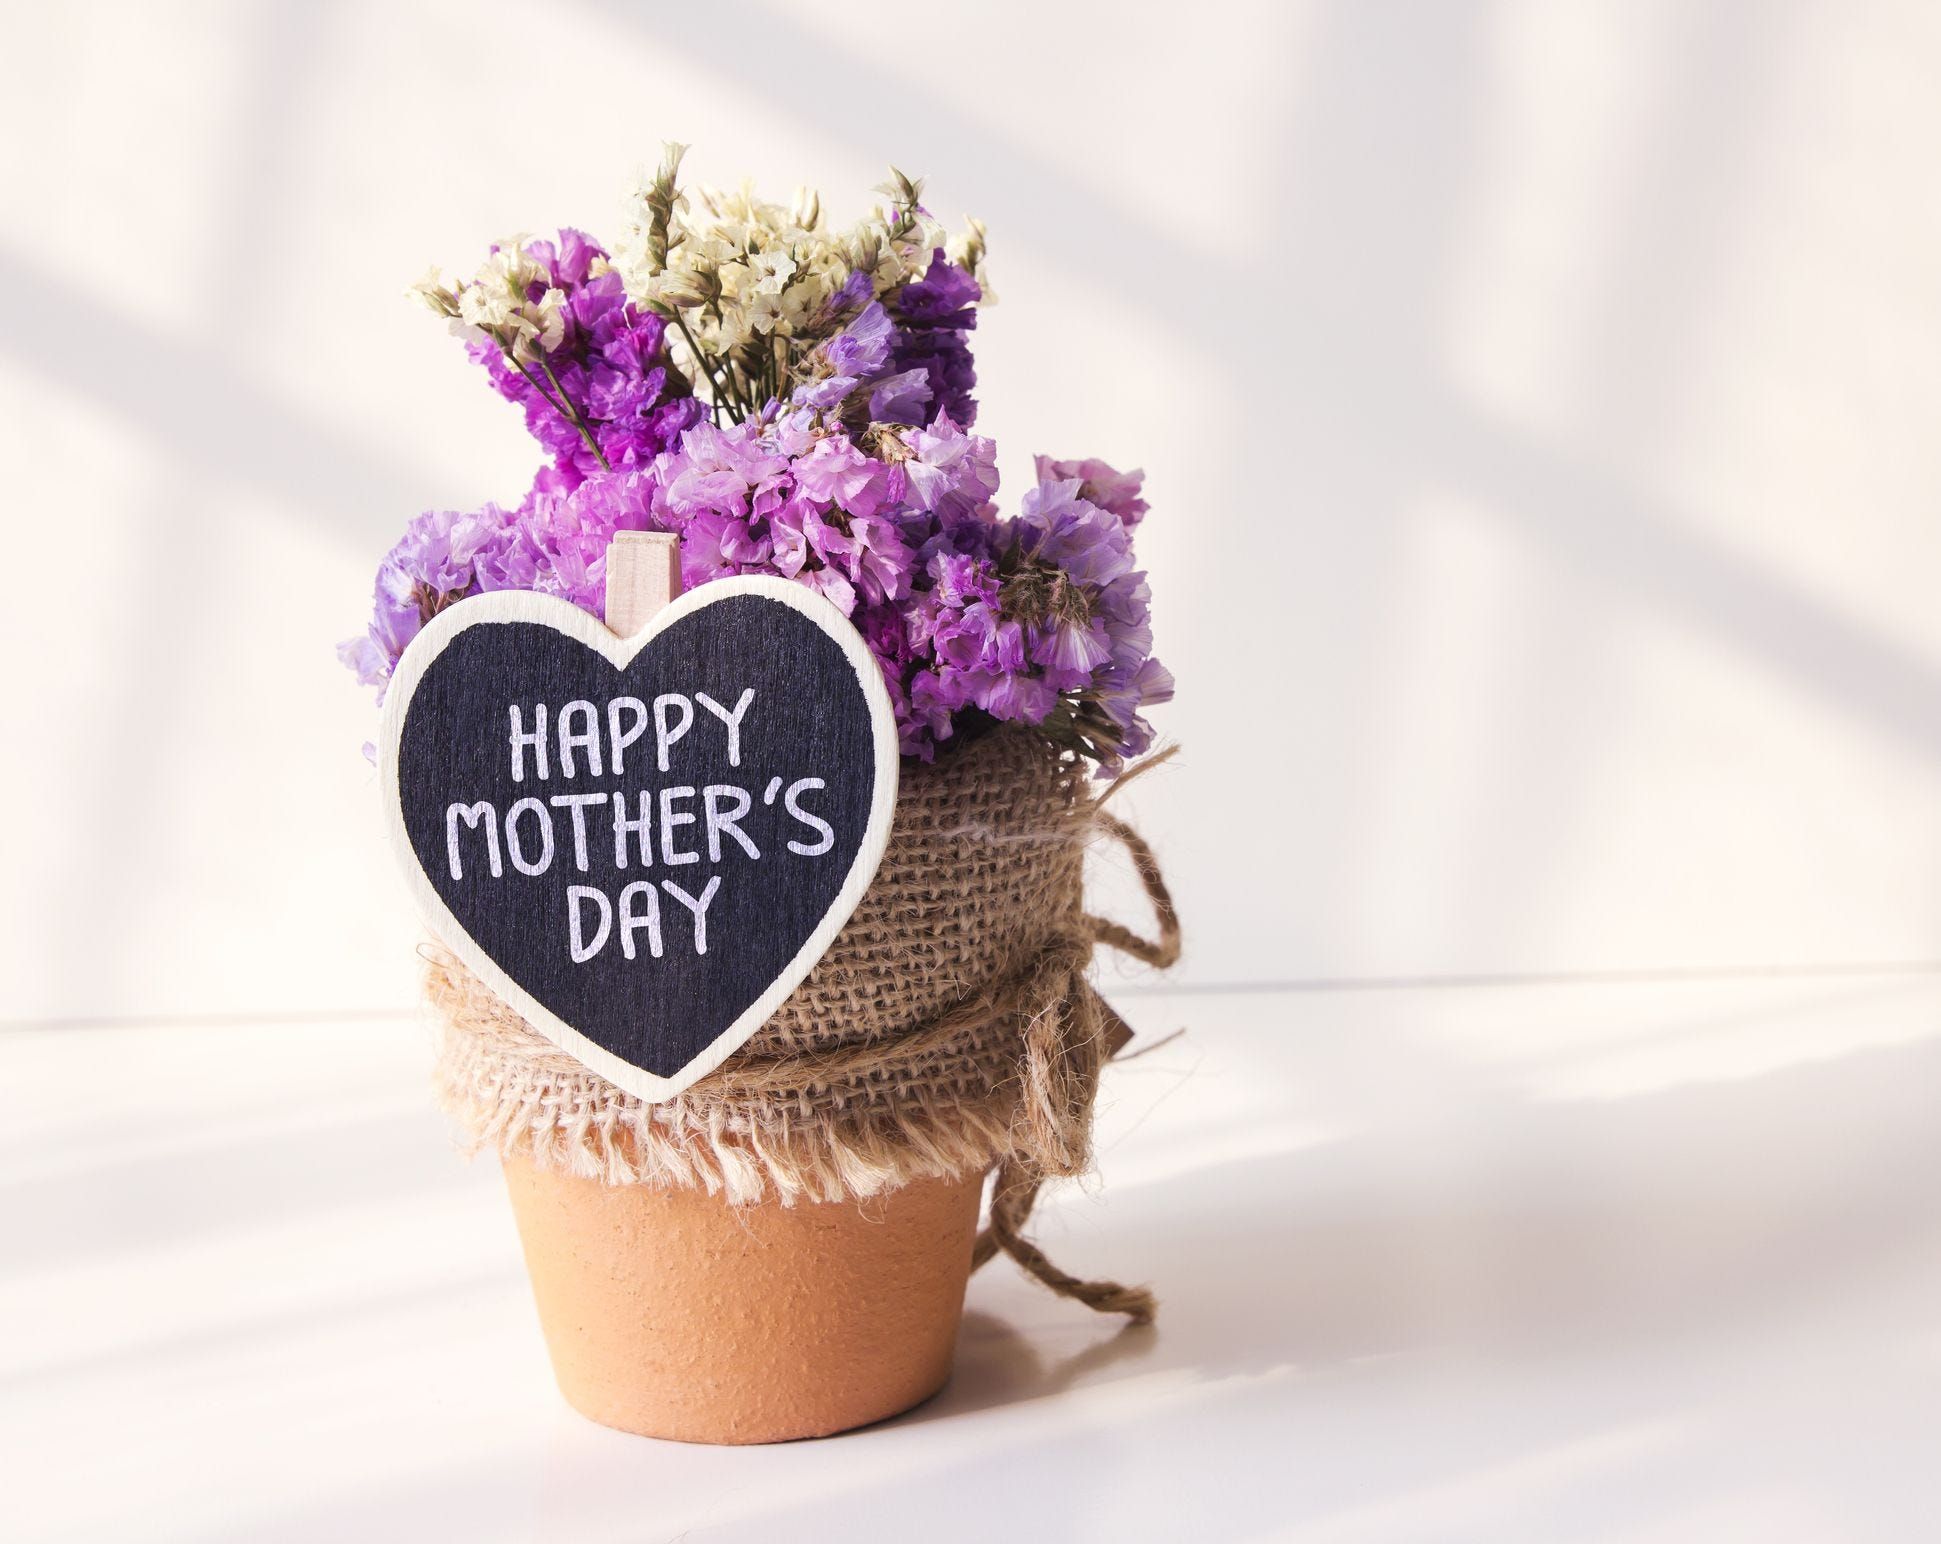 Mothers Day Ideas, list of 15 ideas for make Mothers day special, crafts  and DIY ideas #MothersDay, #DIY, #Crafts, #Cards, #Moms - A Thrifty Mom -  Recipes, Crafts, DIY and more